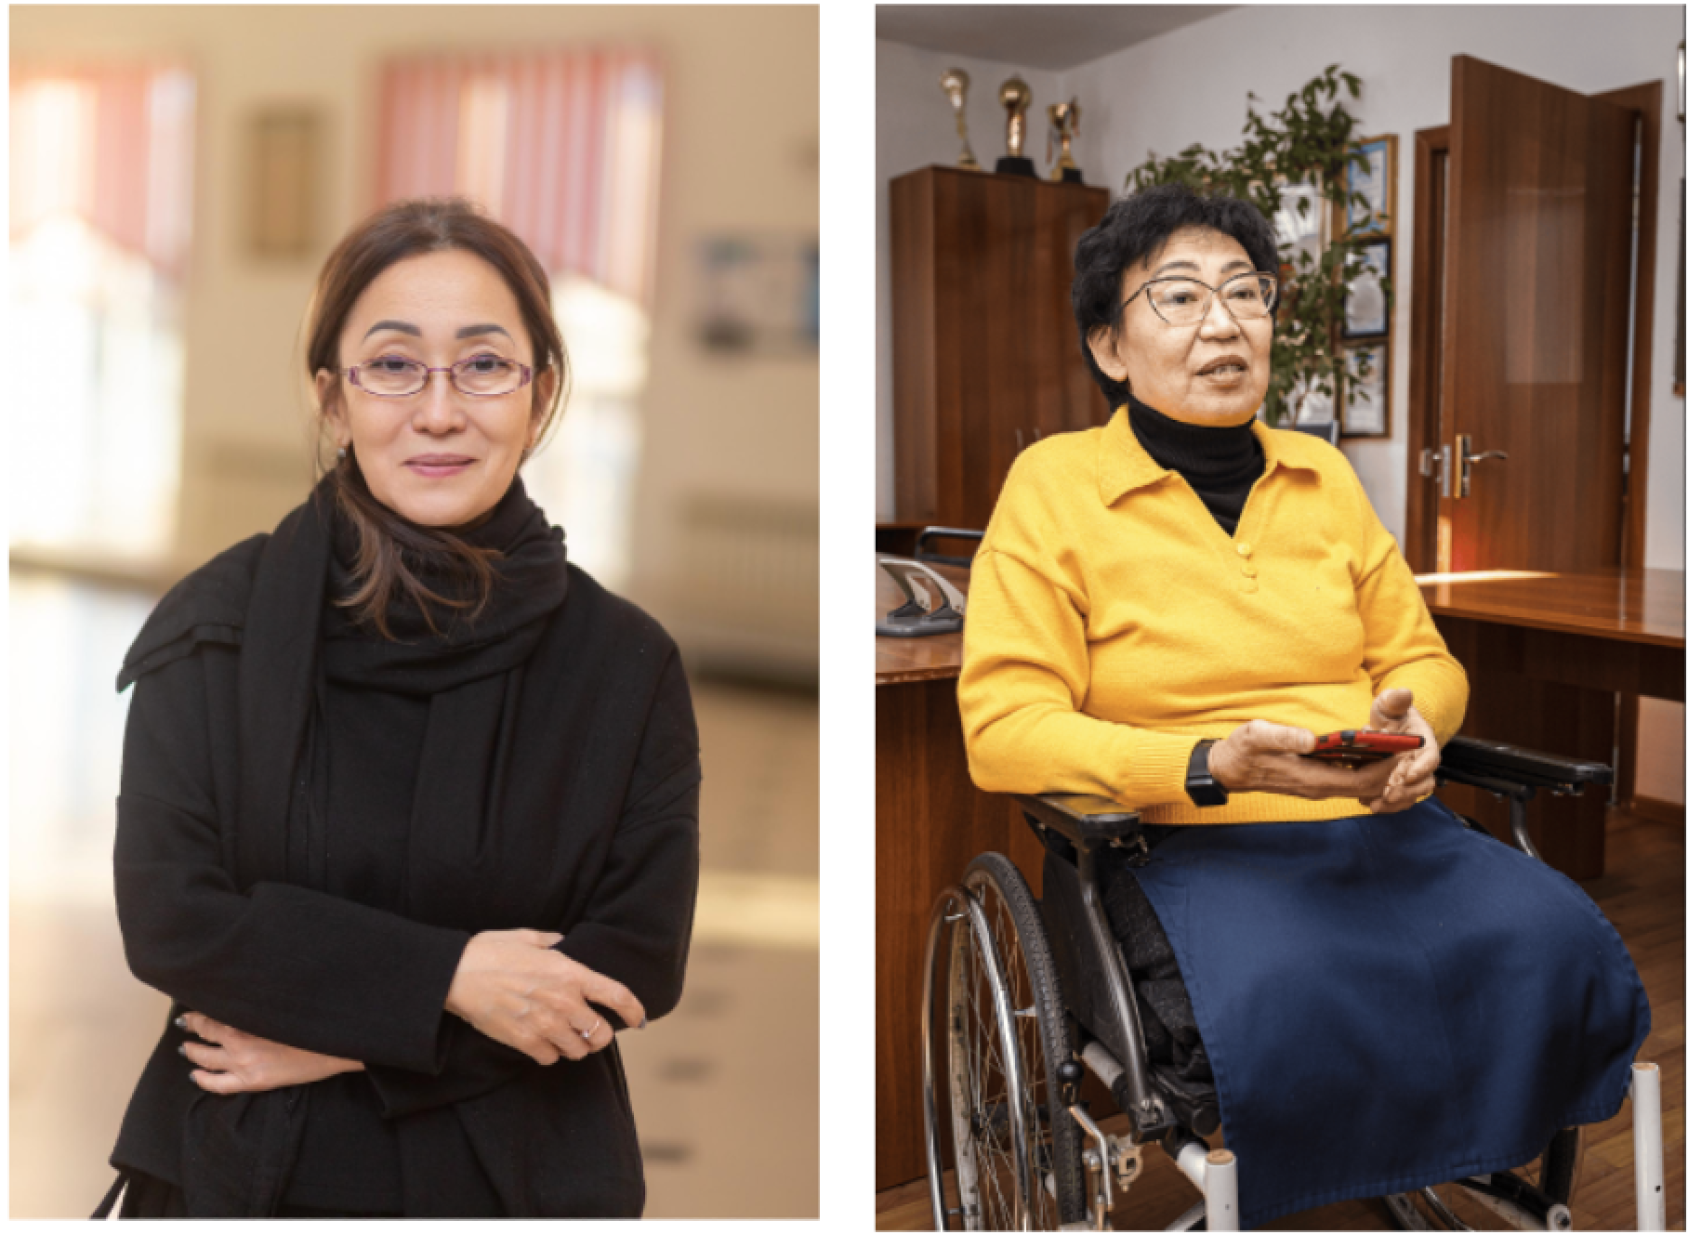 Two women side by side, one in a black shirt and the other in a yellow shirt in a wheelchair